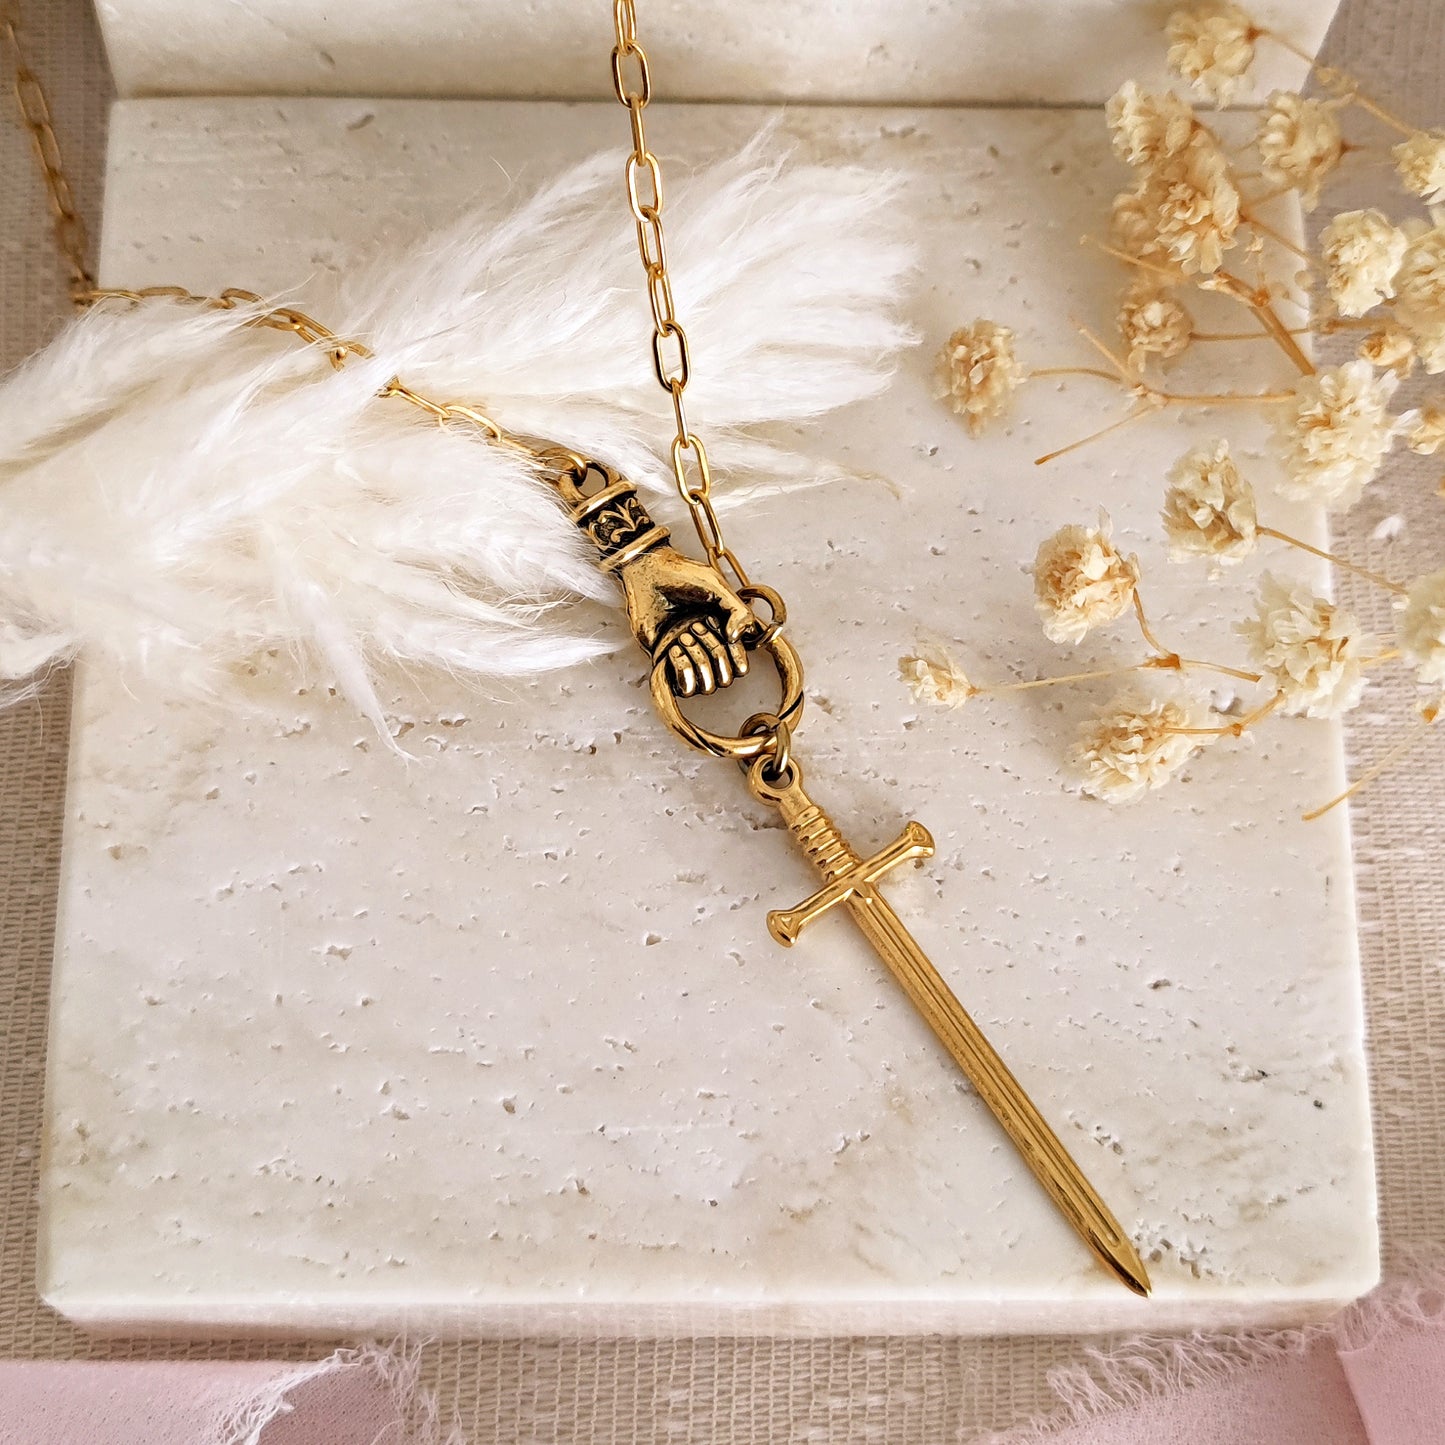 King of Camelot Necklace, Excalibur Sword and Hand Necklace, Bookish Jewelry, Dark Academia Necklace, Knightcore Necklace